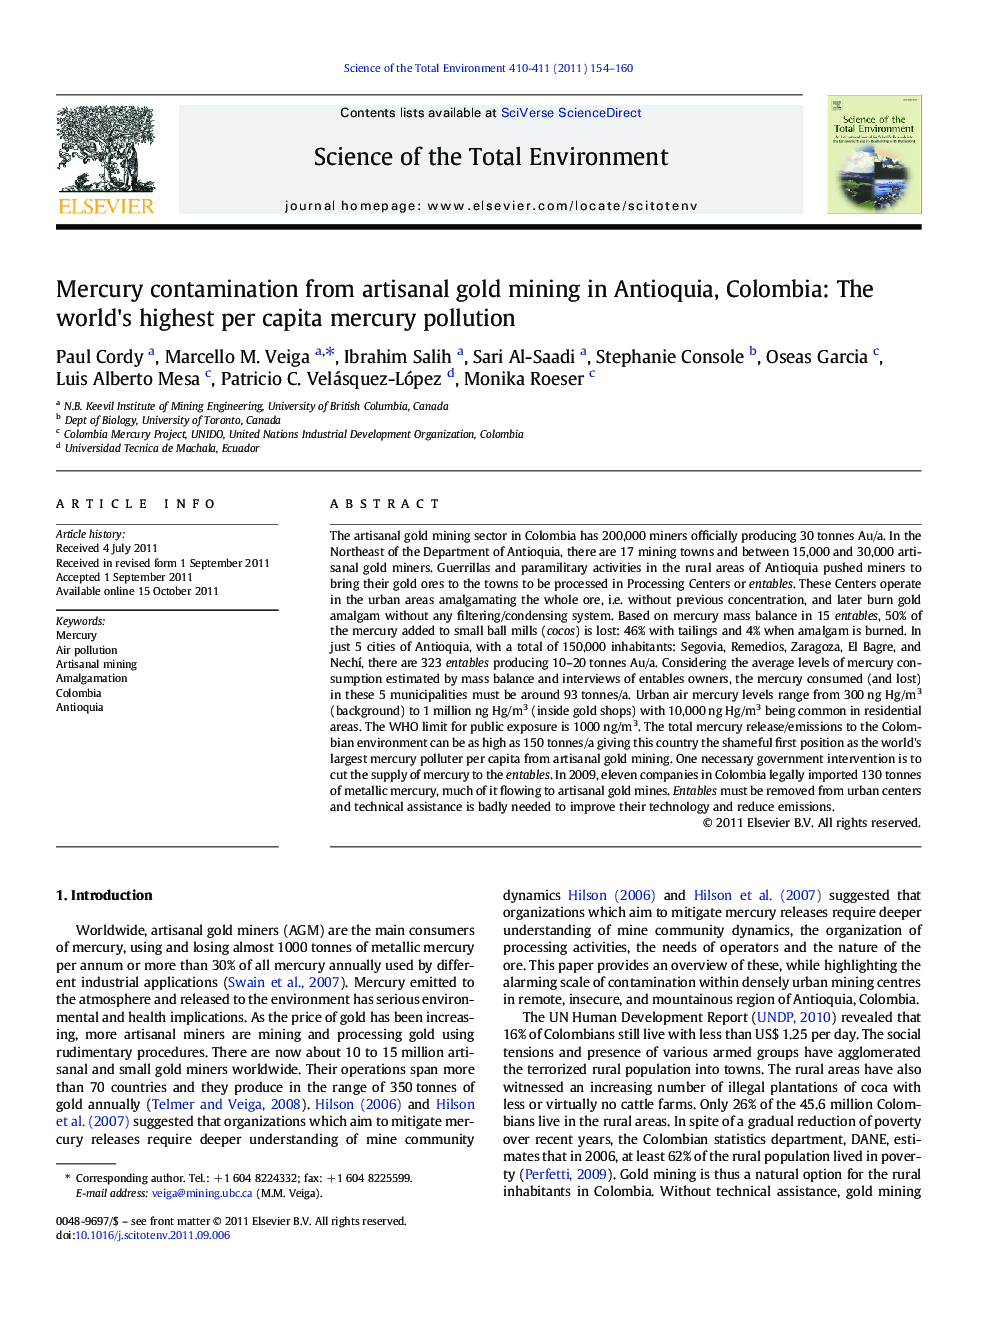 Mercury contamination from artisanal gold mining in Antioquia, Colombia: The world's highest per capita mercury pollution